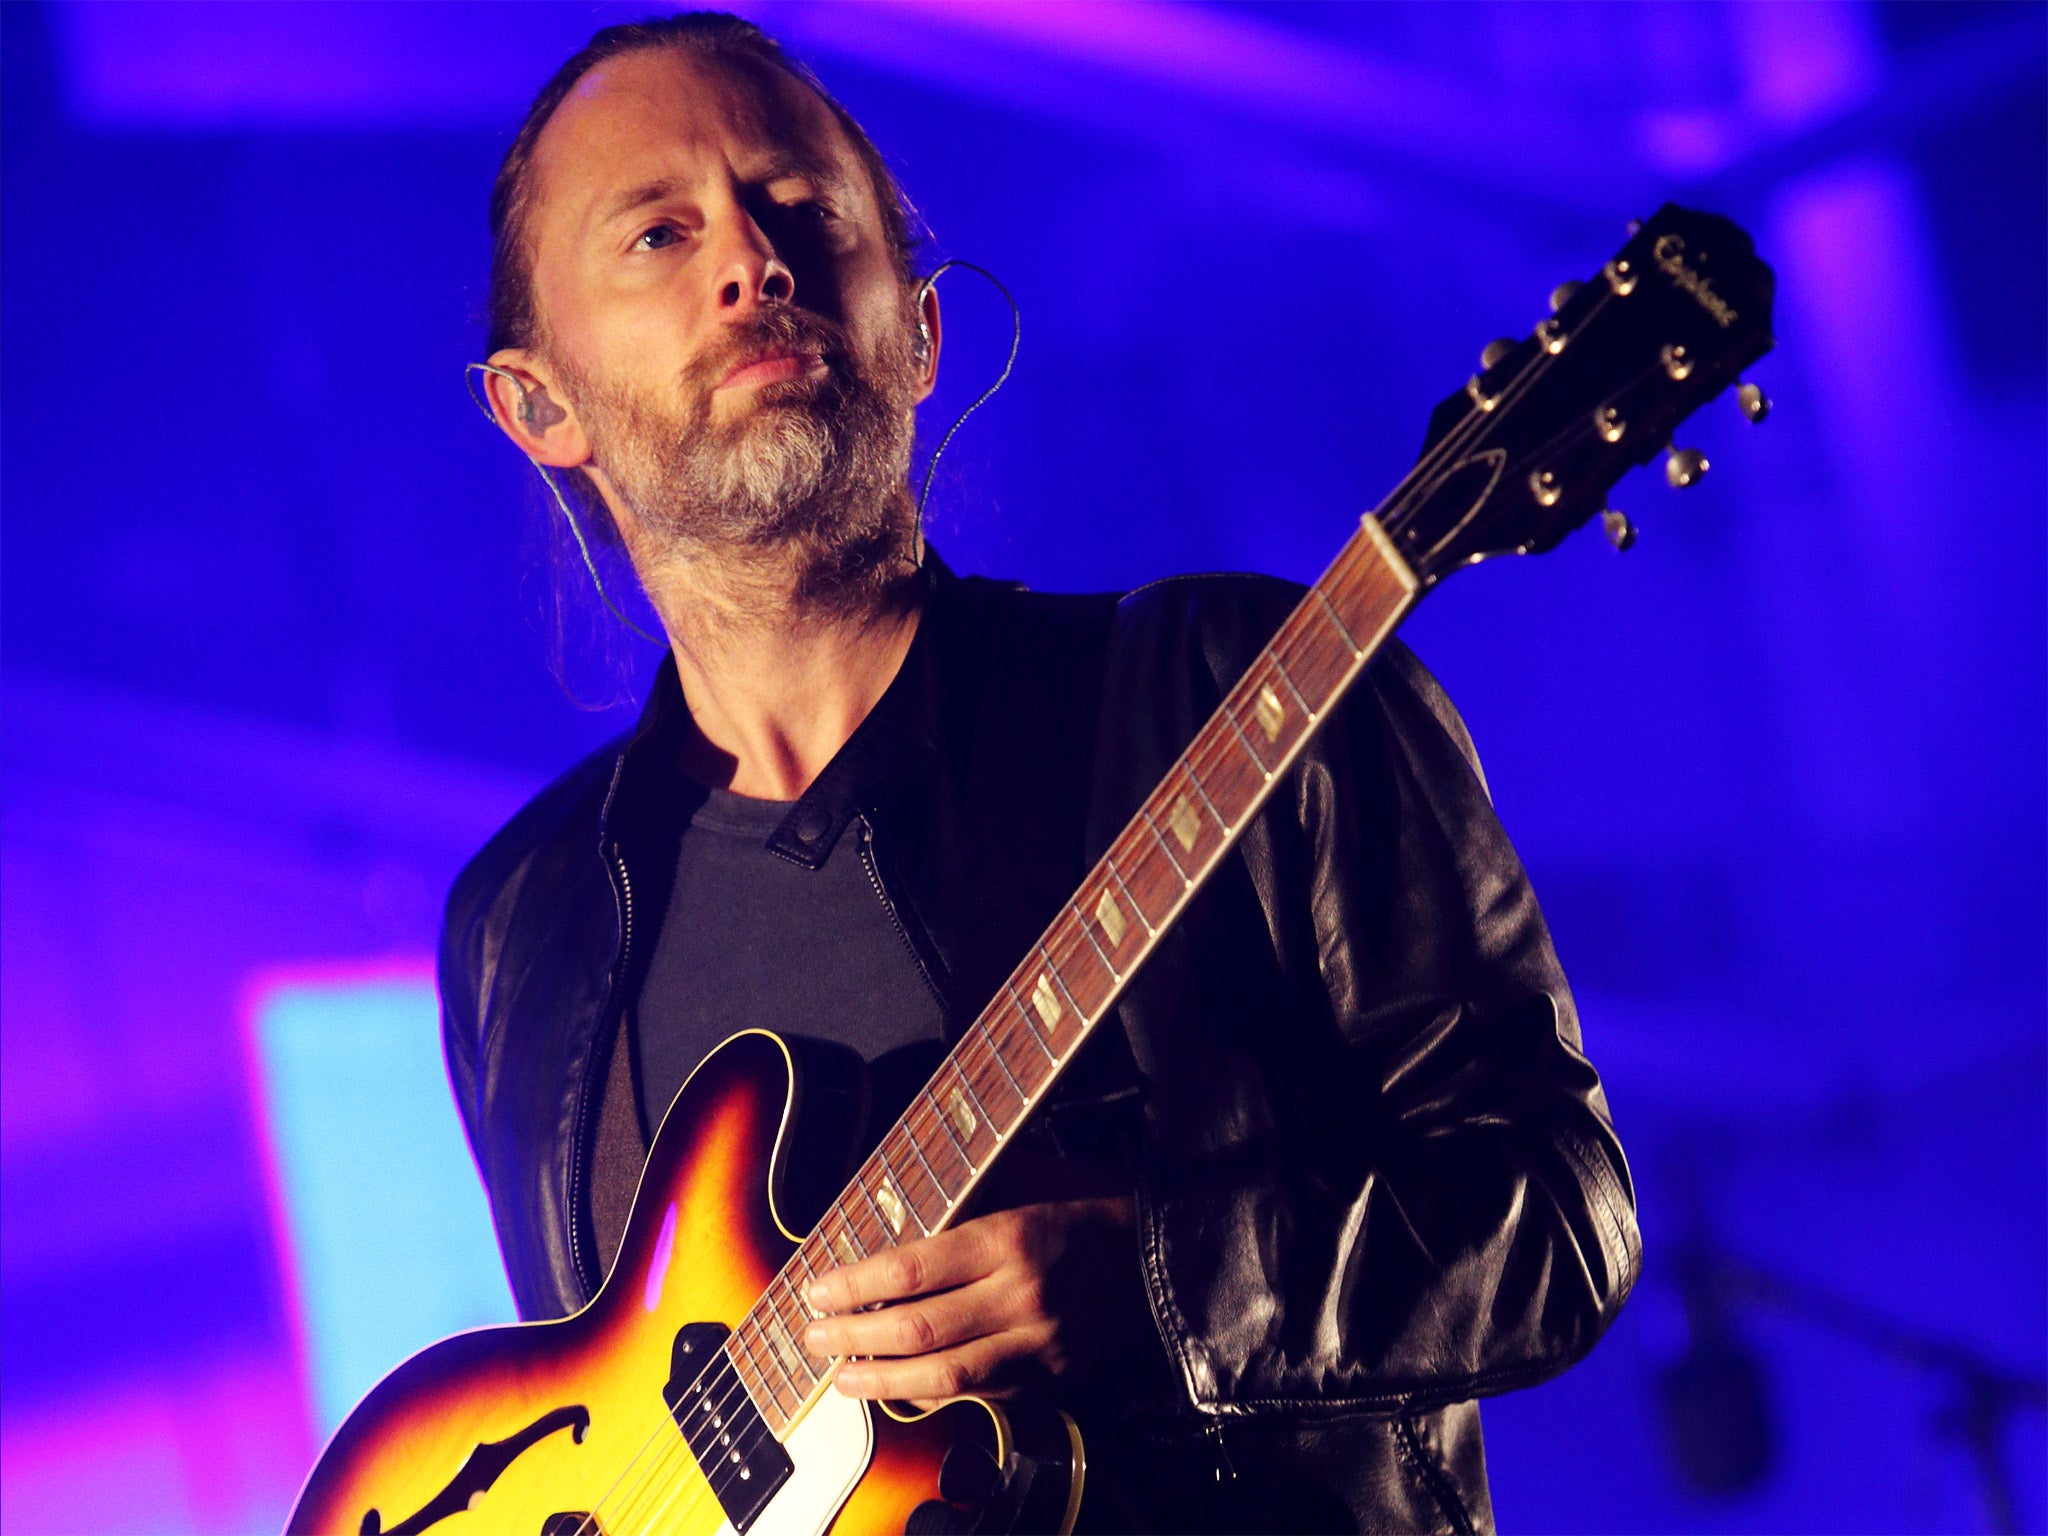 Radiohead frontman says music should be about 'crossing borders rather than building them'